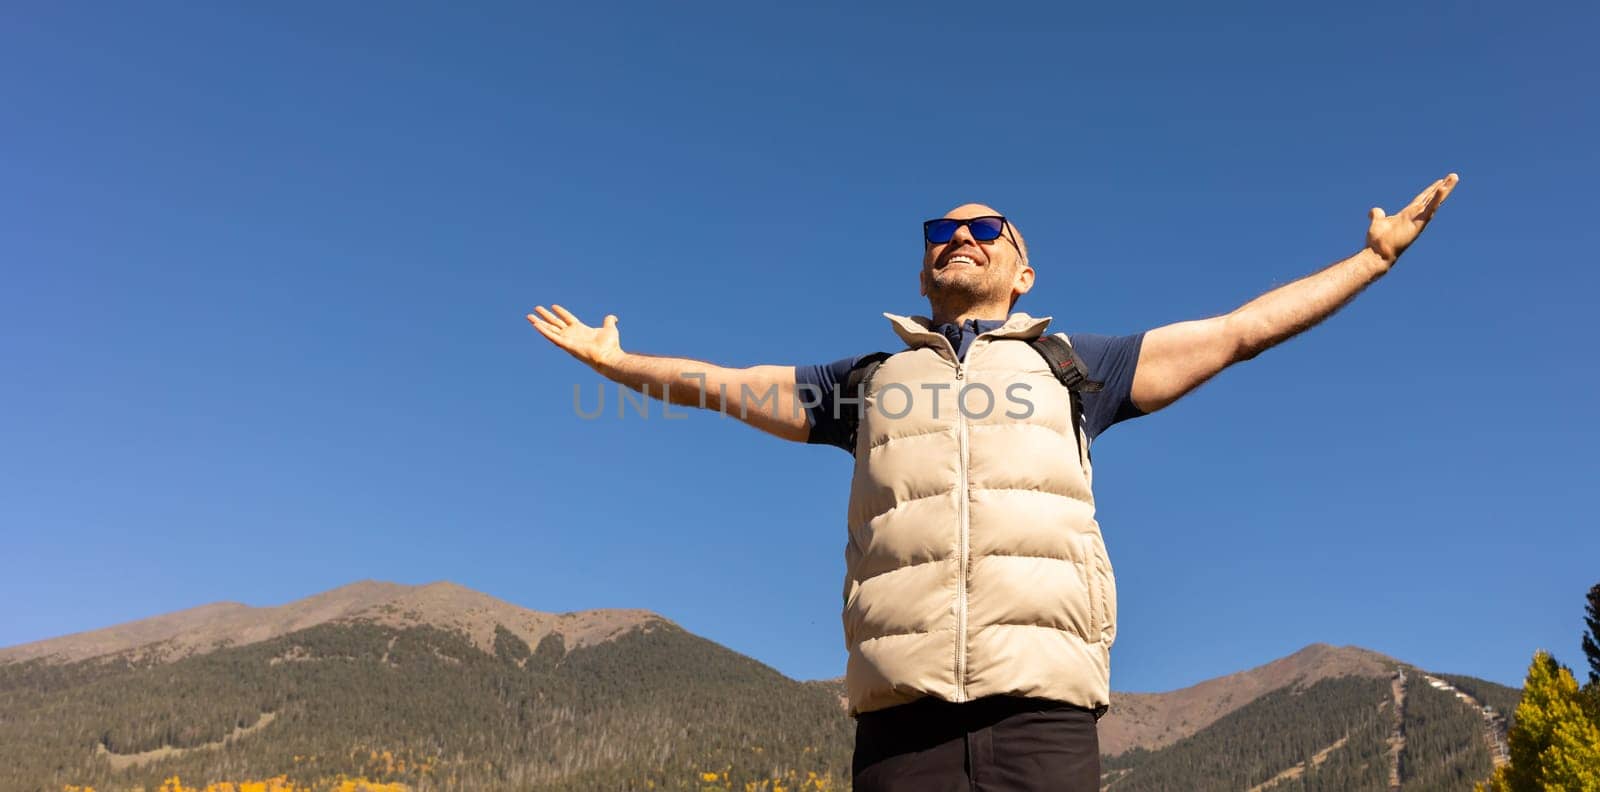 Banner Handsome 40 yo Male Tourist with Open Arms, Mountains, Blue Sky on Background. Male Hiker with Backpack Does Hiking, Trekking In Autumn Nature. Travel, Active Lifestyle Copy Space. Horizontal by netatsi